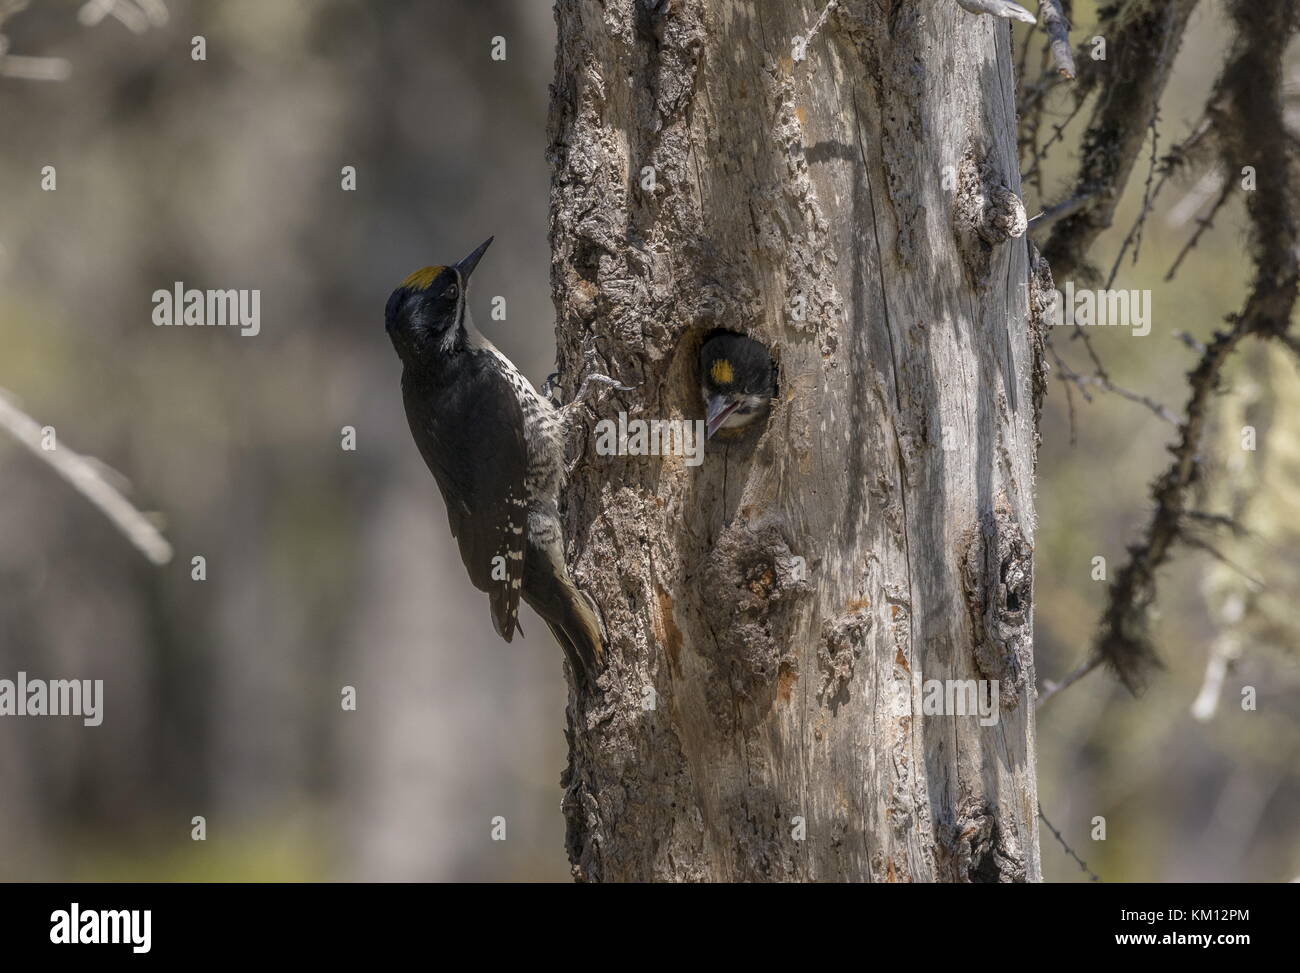 Male Black-backed woodpecker, Picoides arcticus,  at nest hole, with male nestling; Newfoundland. Stock Photo